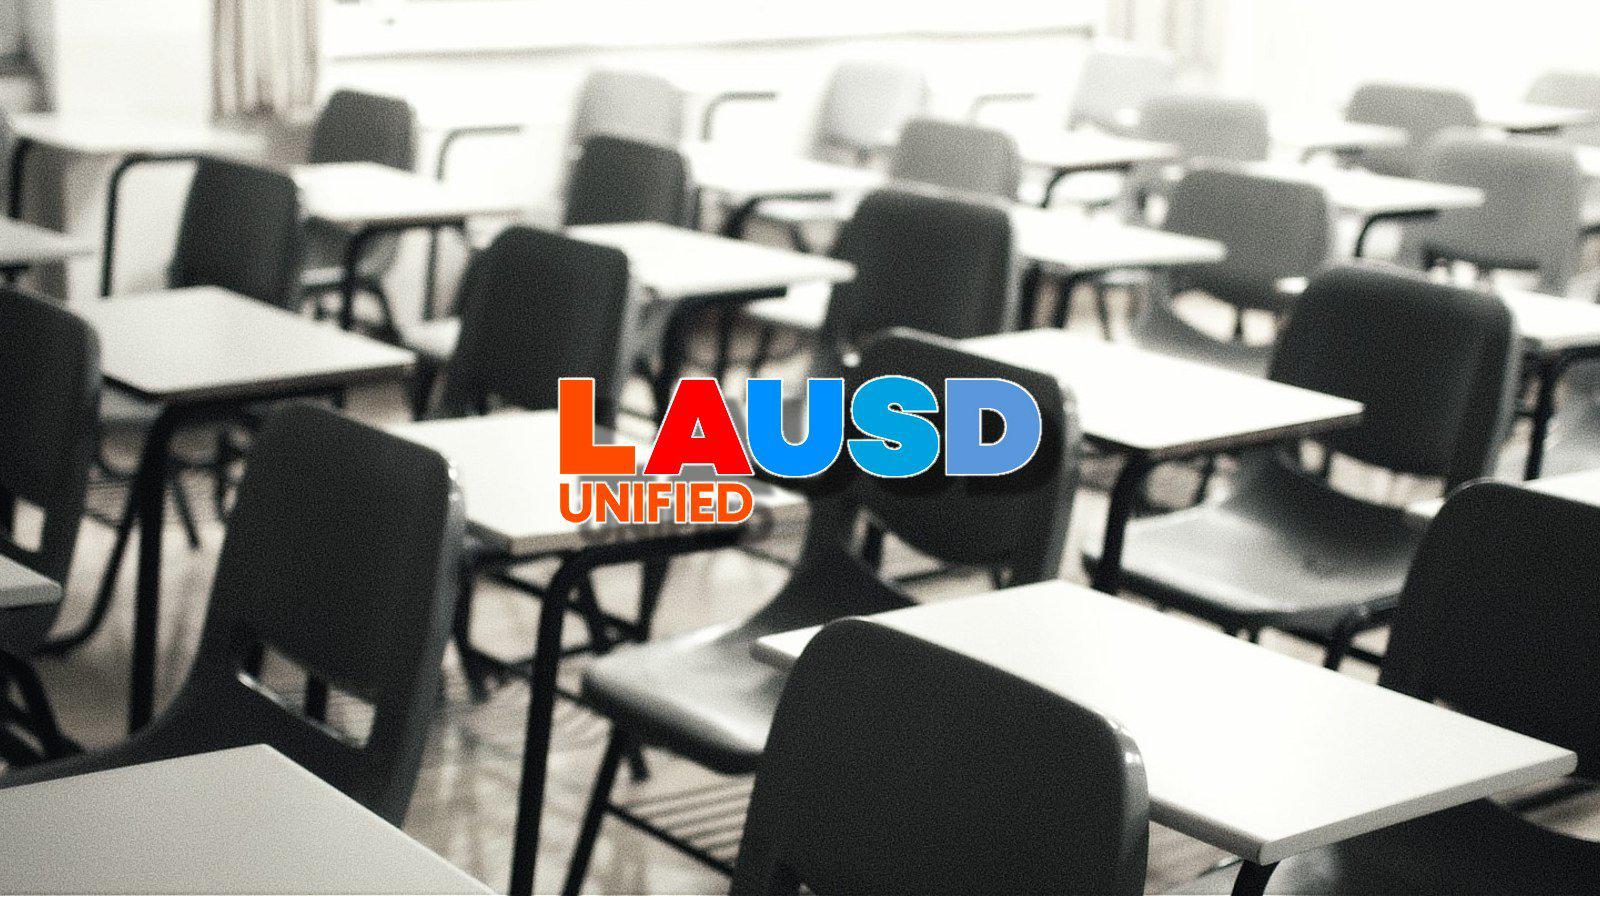 Second largest U.S. school district LAUSD hit by ransomware